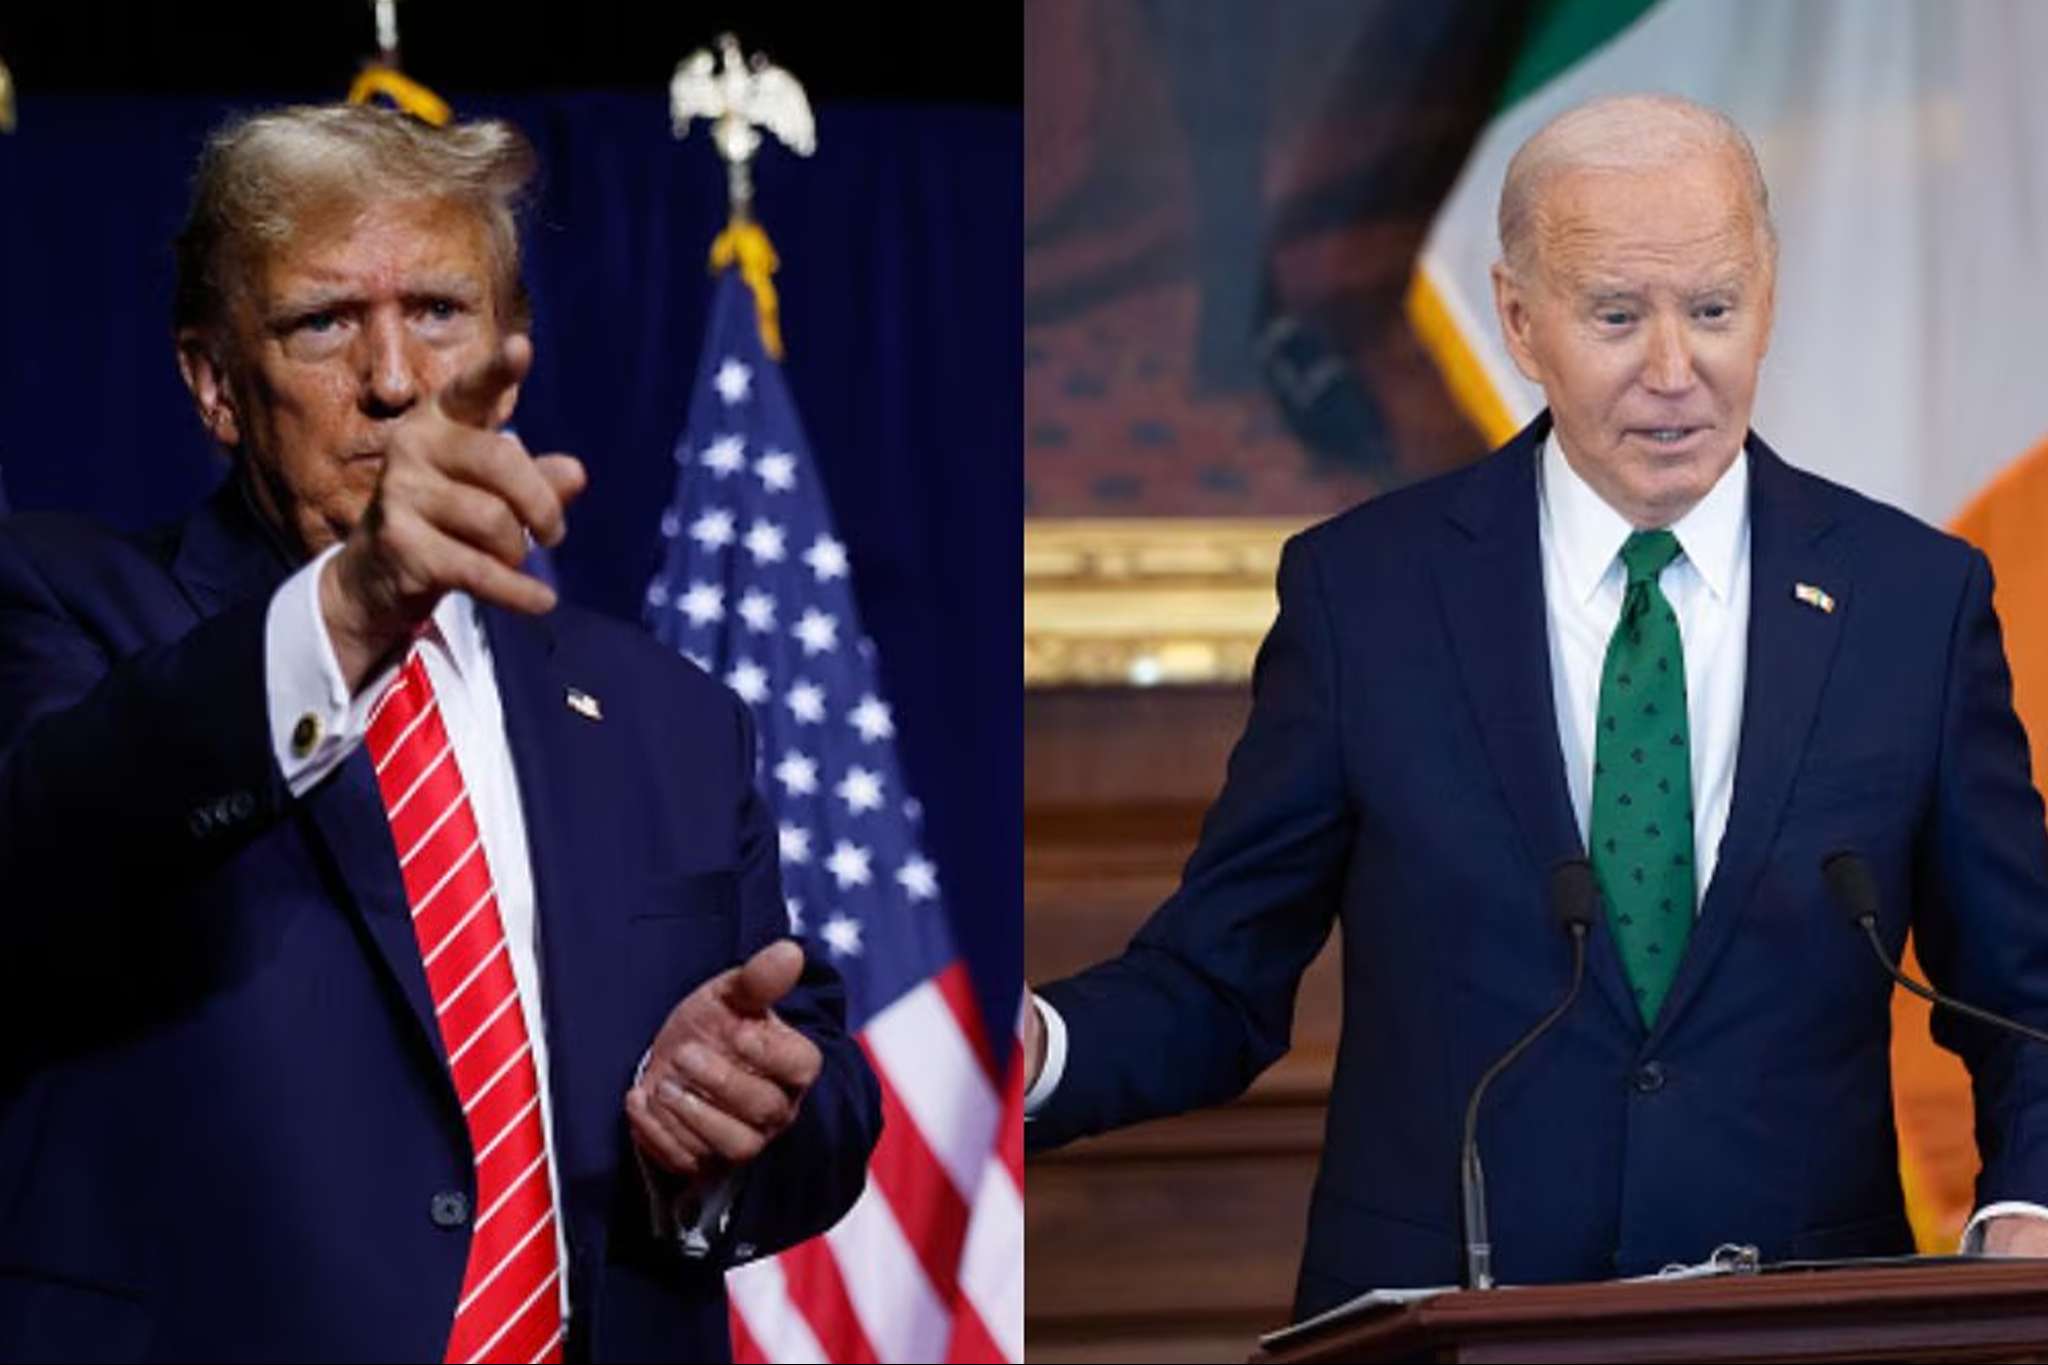 Biden campaign alleges Trump aims for repeat of January 6th following Ohio 'bloodbath' forecast.3